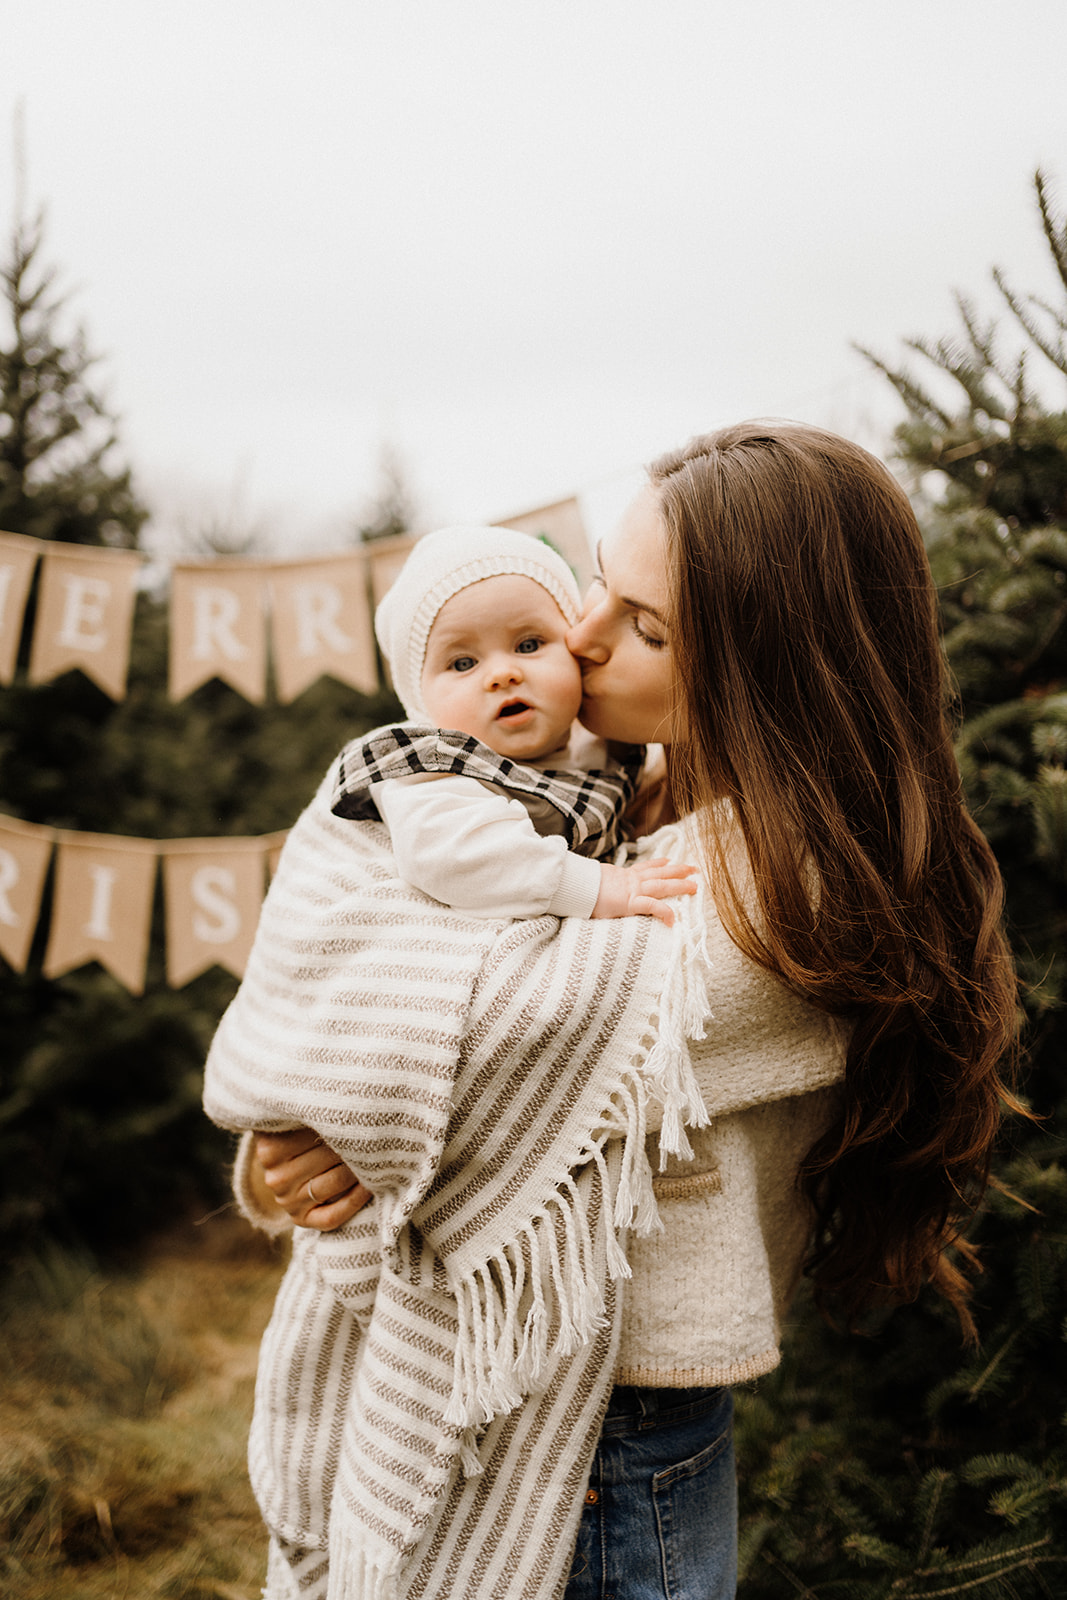 A little girl being held by her mother outside in front of Christmas Trees.